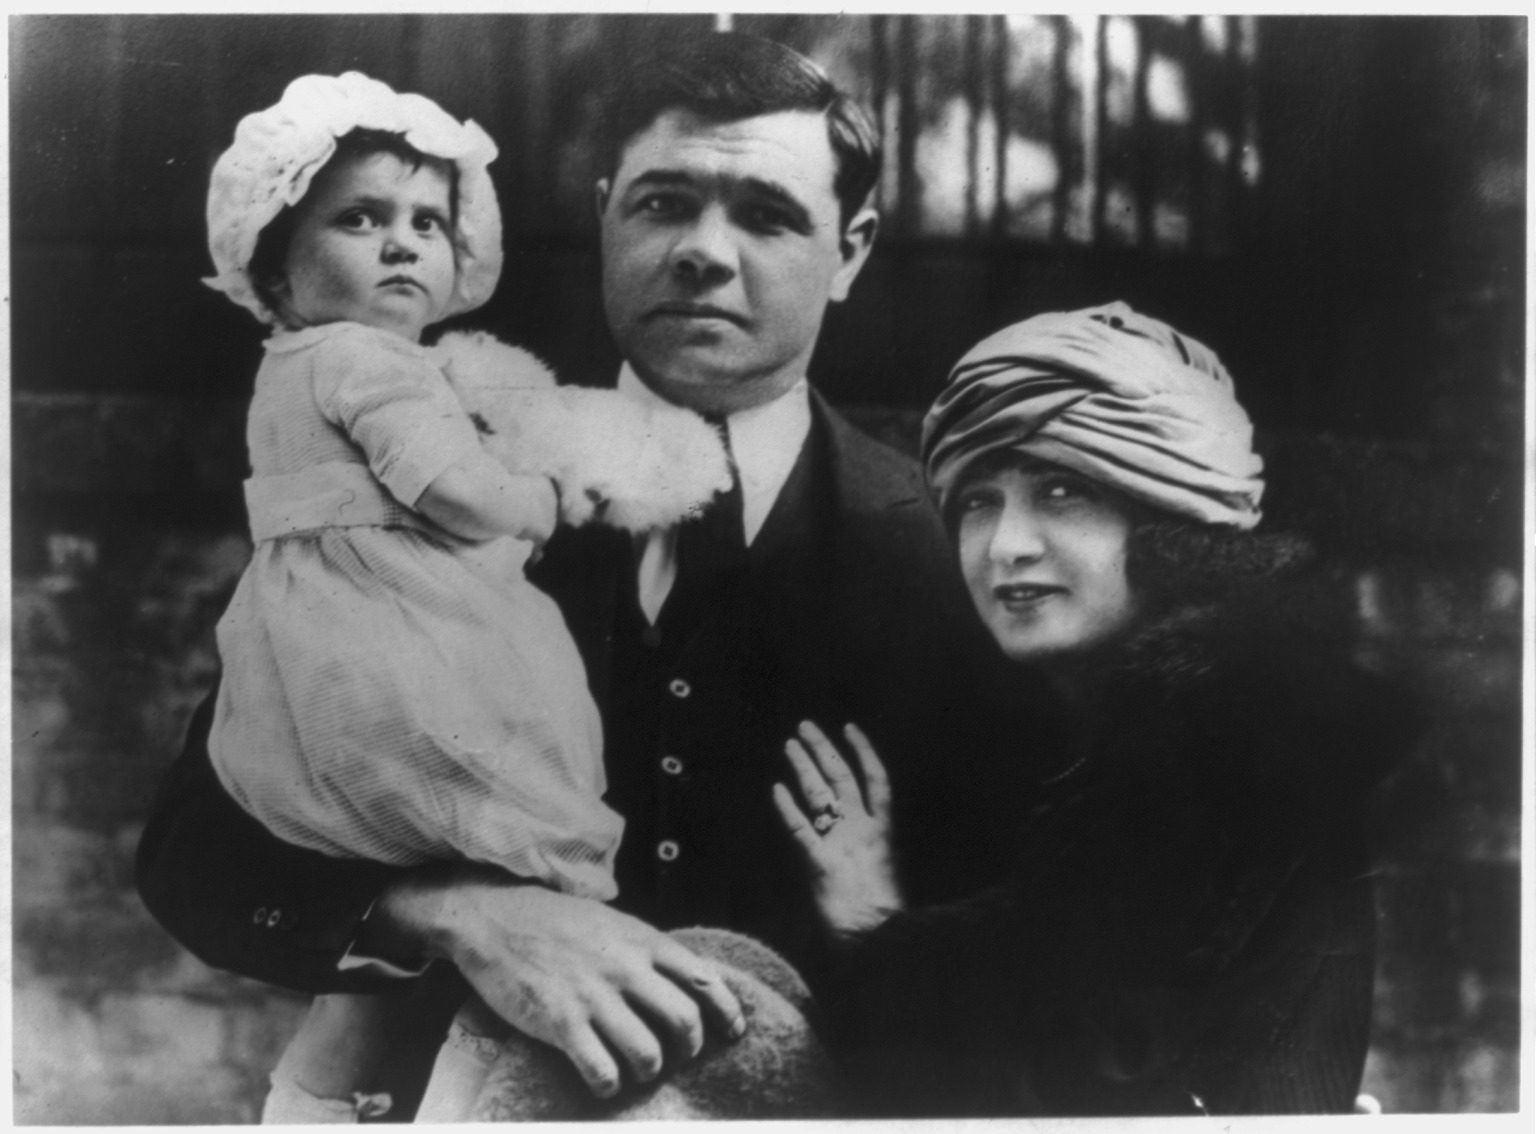 A portrait of Babe Ruth and his family by Underwood & Underwood. (Courtesy Library of Congress)